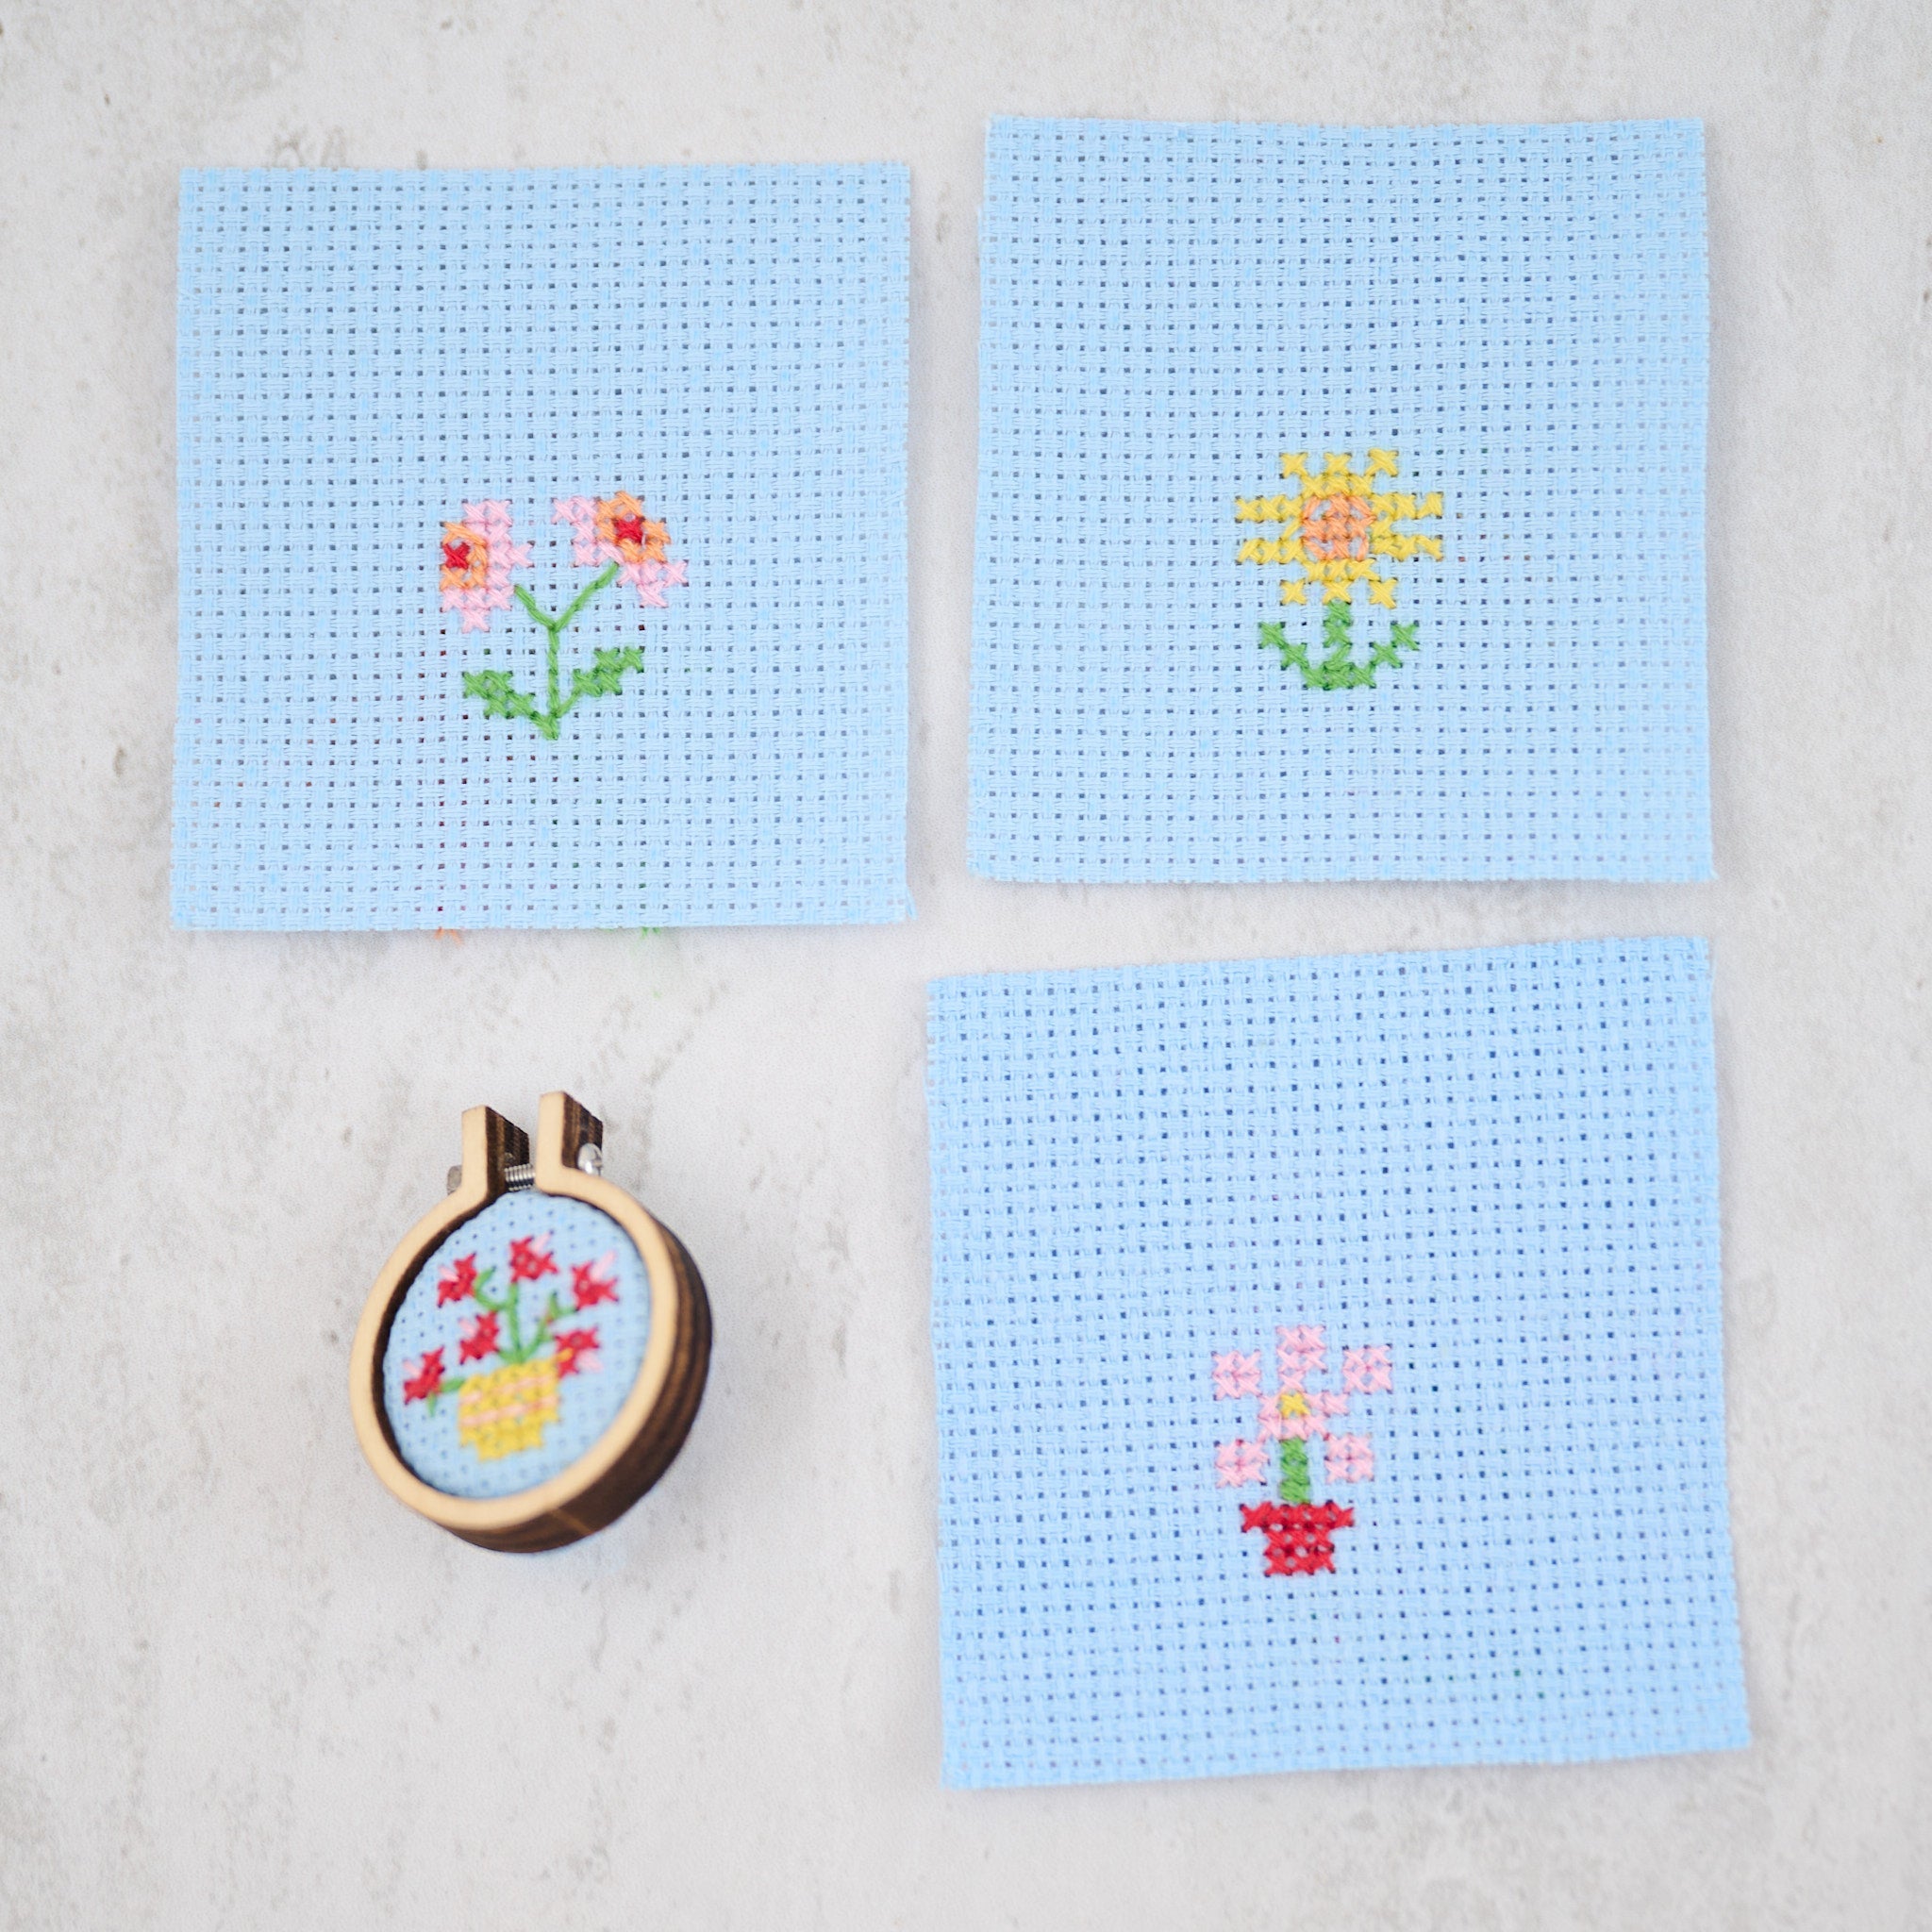 Bunch of Flowers Mini Cross Stitch Kit With Hoop In A Matchbox